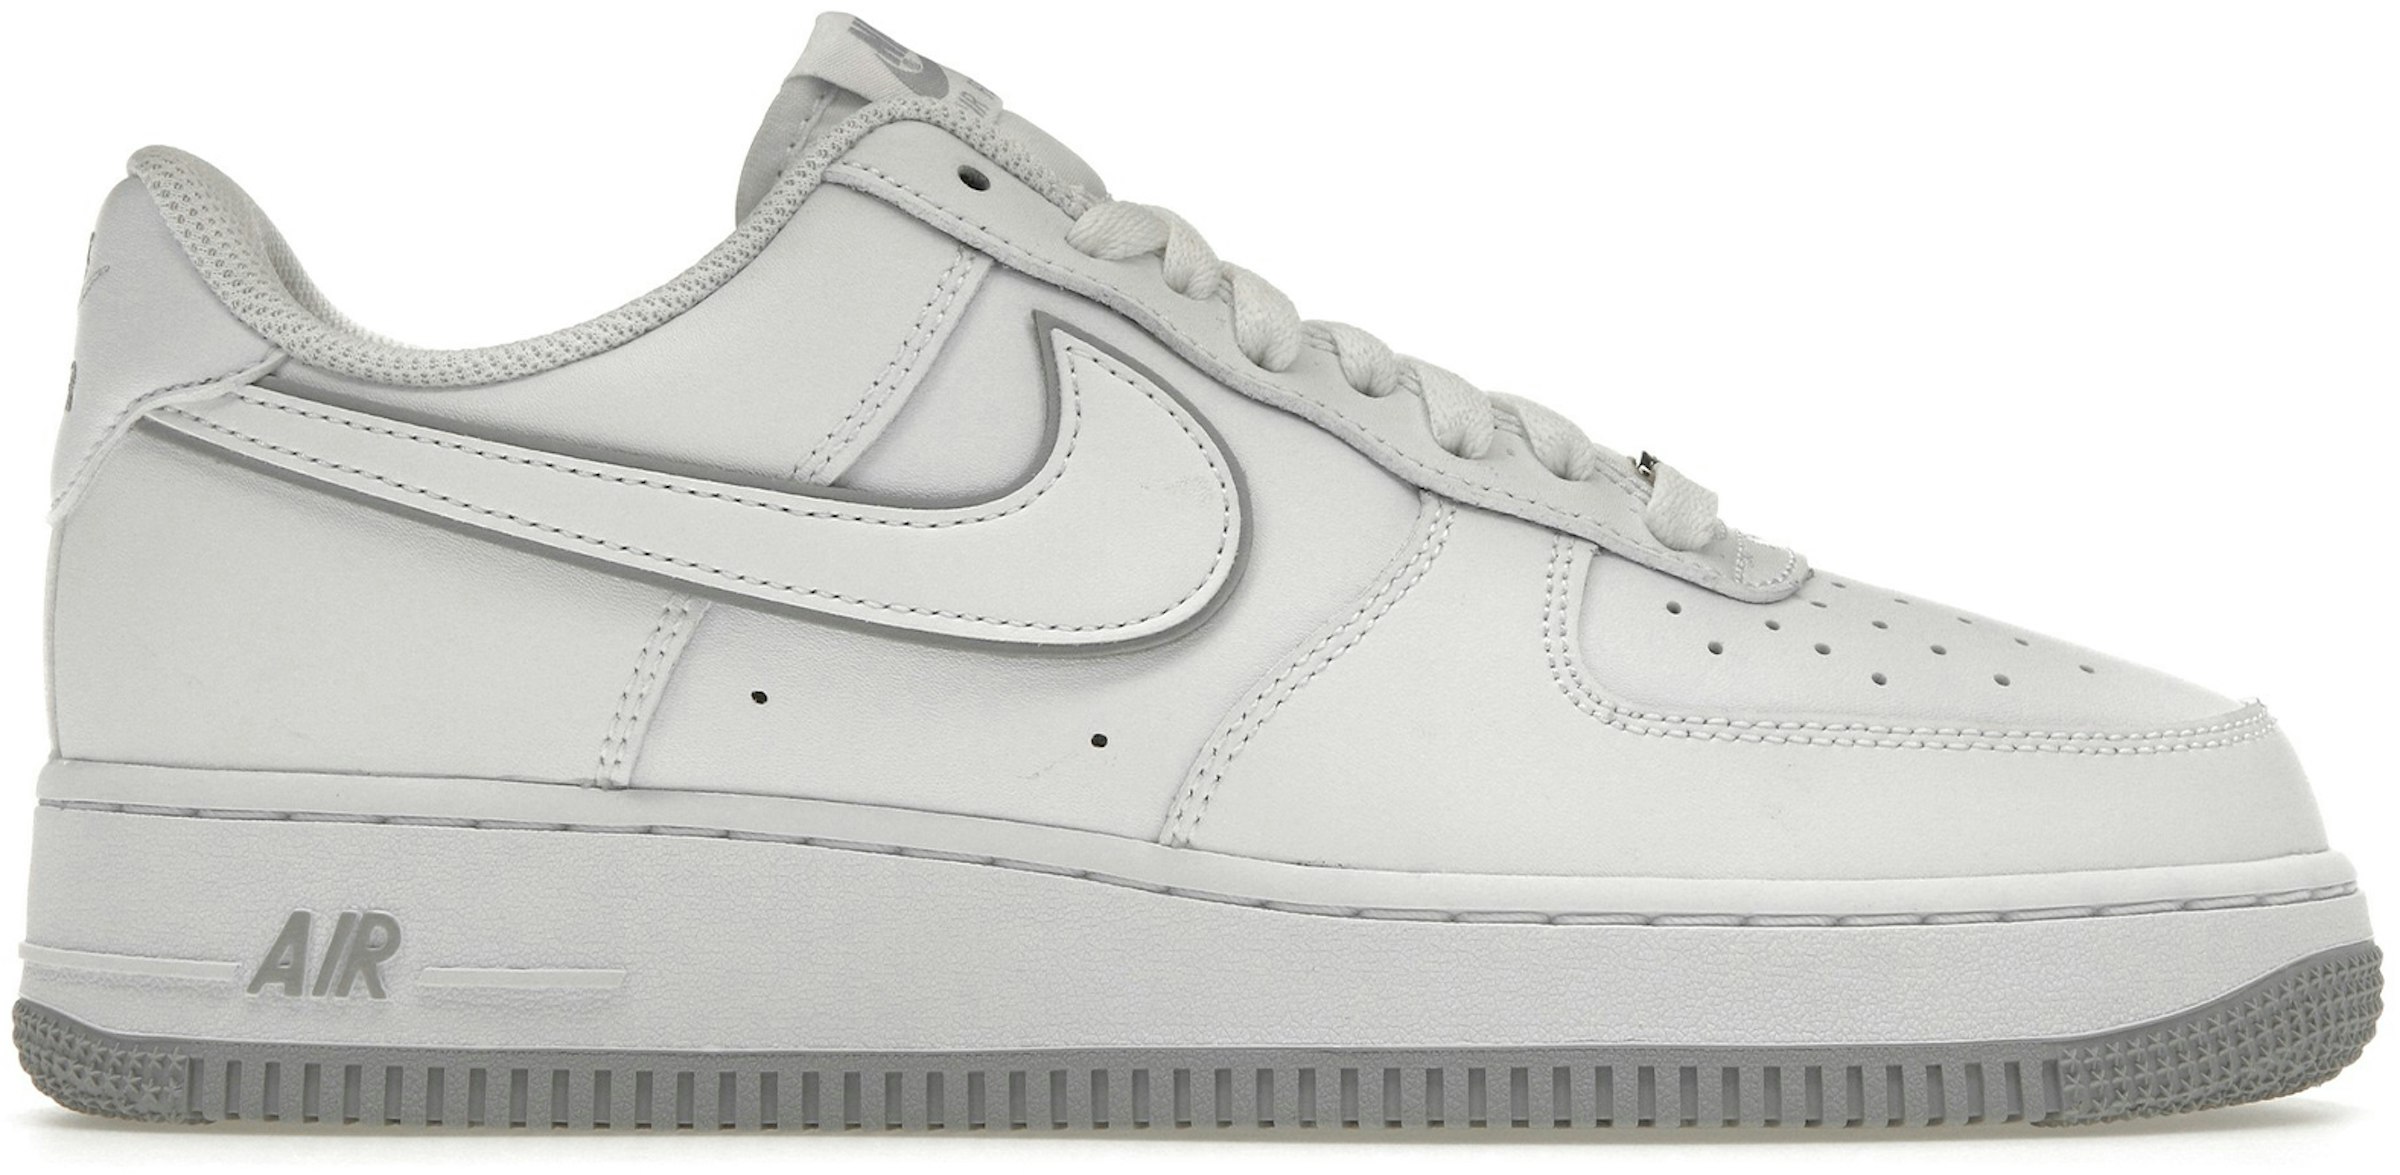 avance sofá caballo de fuerza Nike Air Force 1 '07 Low White Wolf Grey Sole Men's - DV0788-100 - US